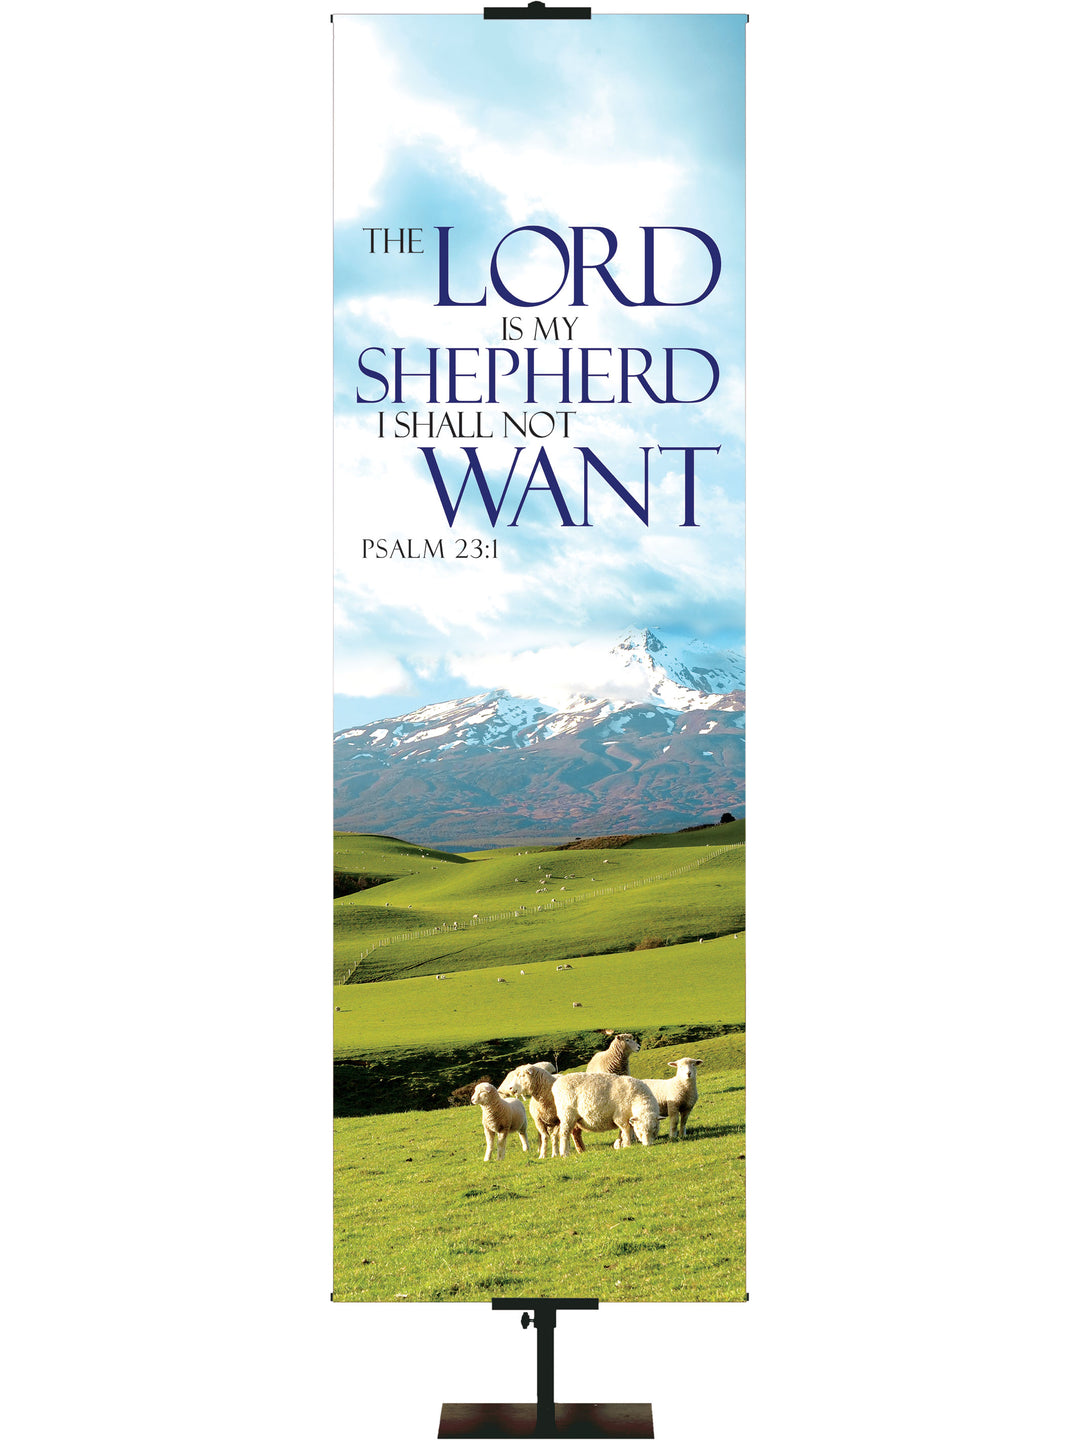 Words of Hope The Lord is My Shepherd - Year Round Banners - PraiseBanners